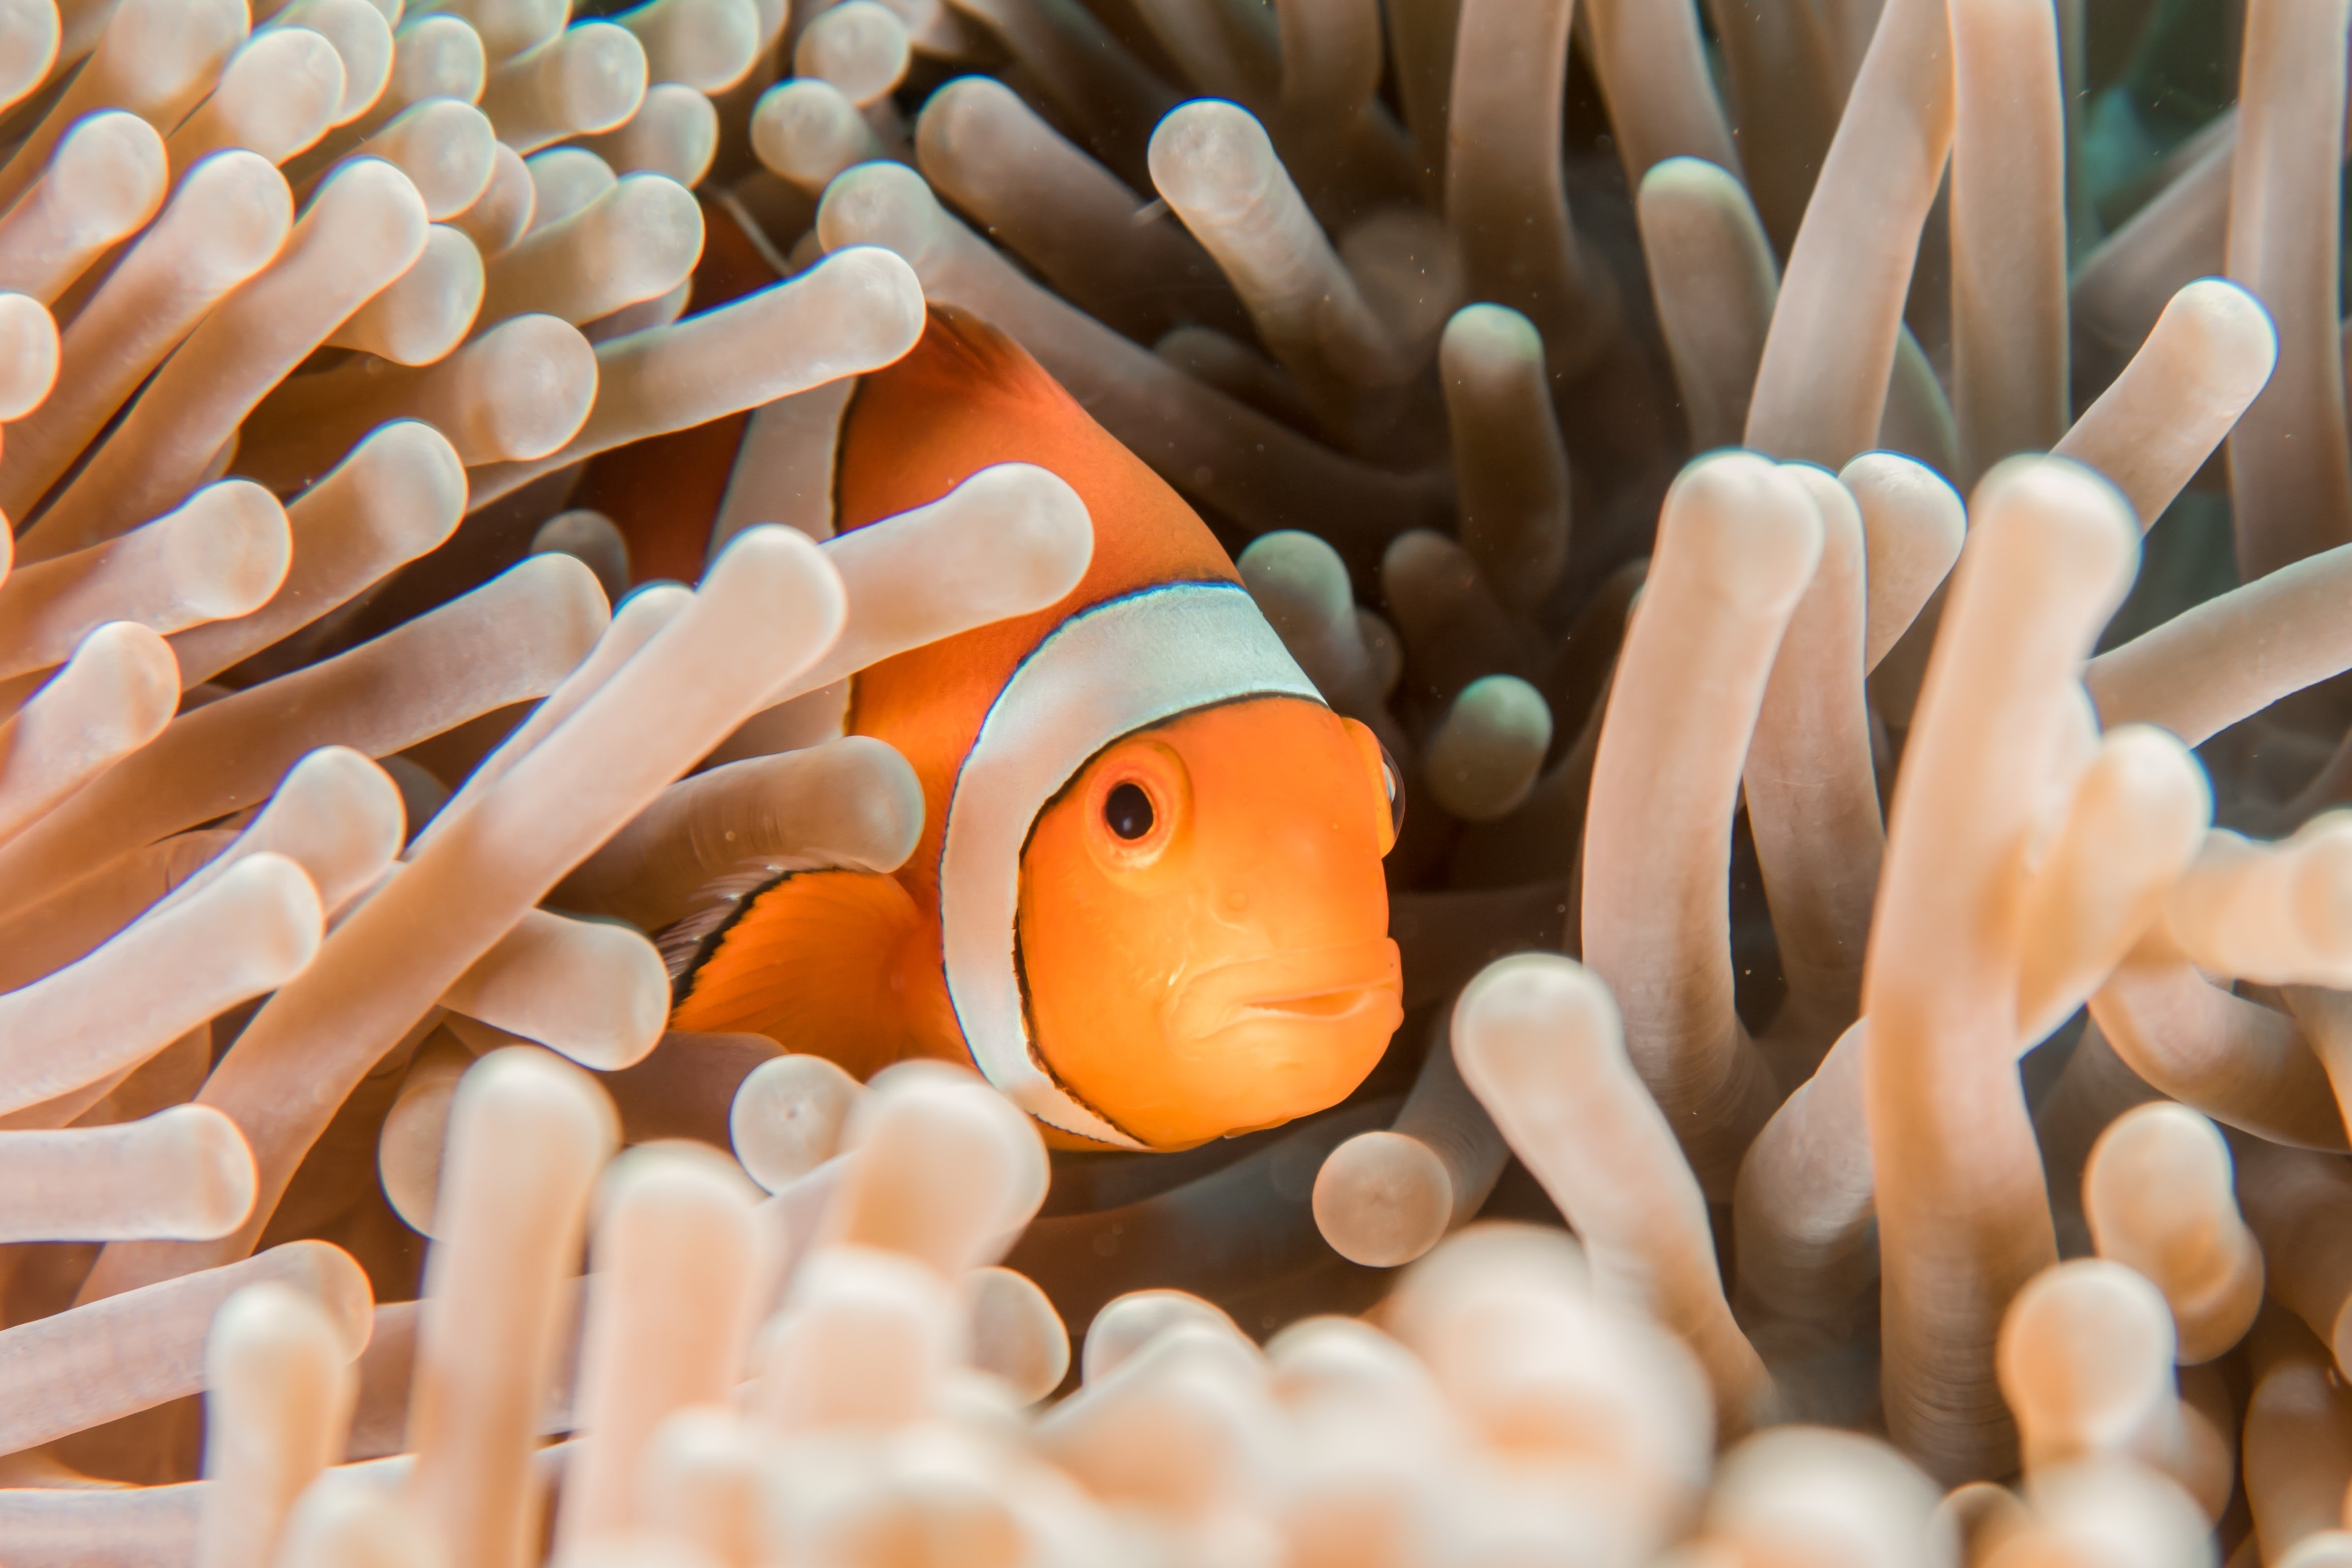 II. The Mutualistic Relationship between Clownfish and Anemones